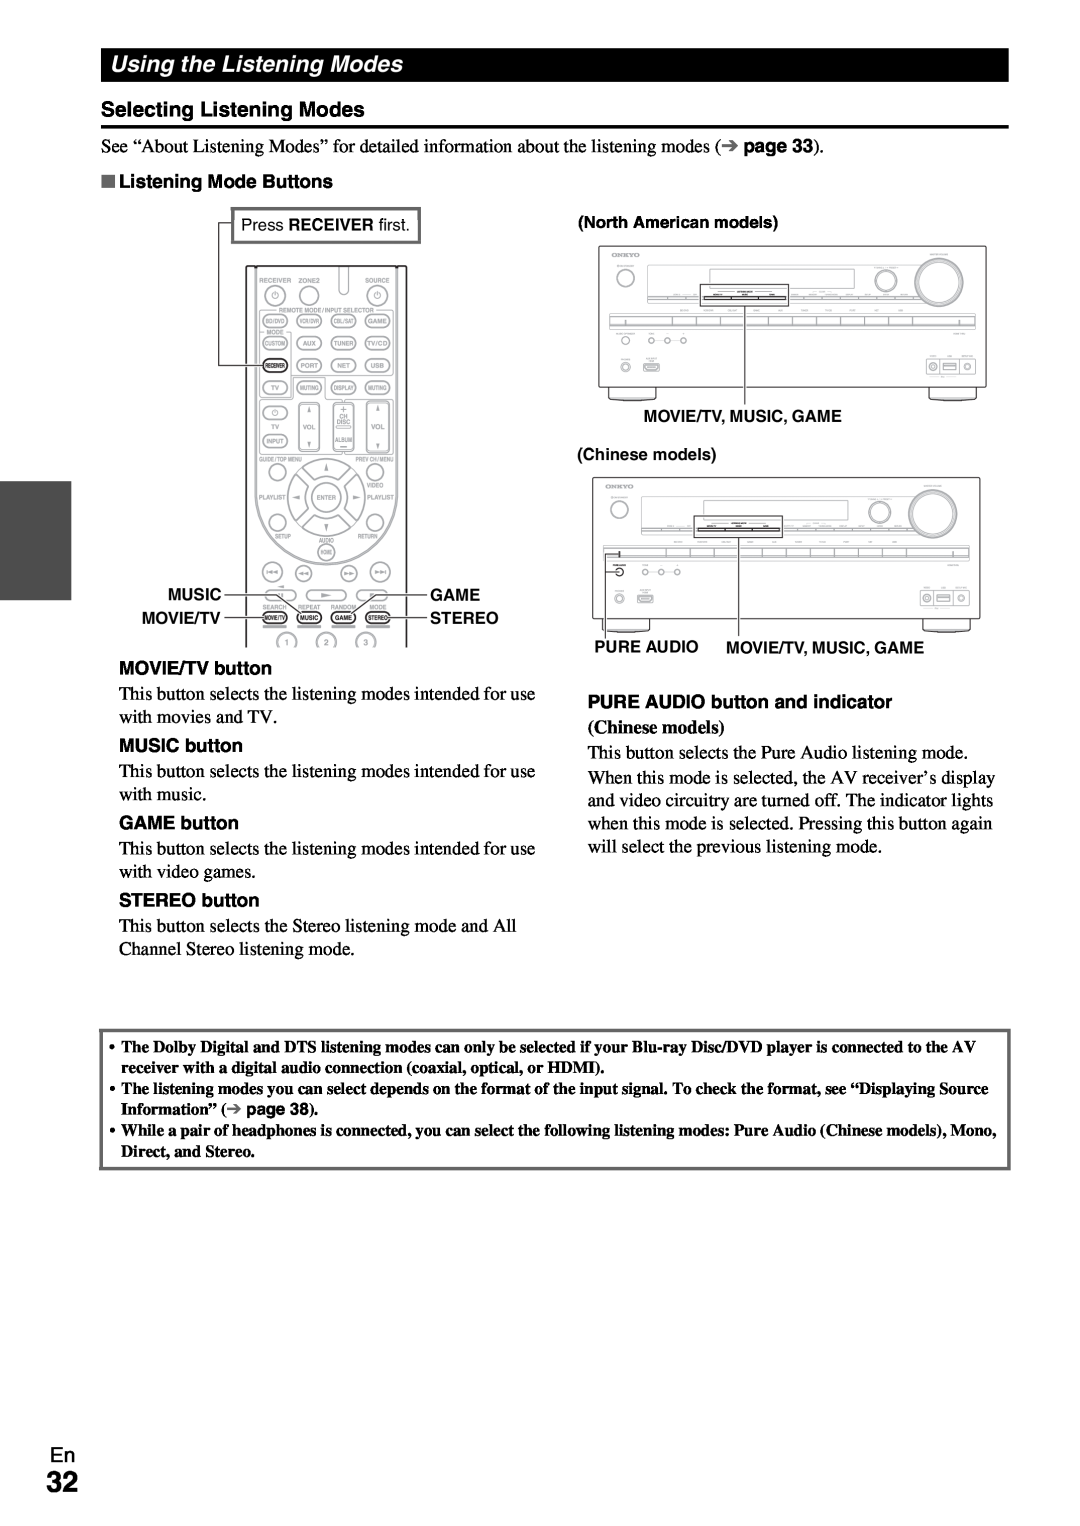 Onkyo HT-RC360 Using the Listening Modes, Listening Mode Buttons, MOVIE/TV button, MUSIC button, GAME button 